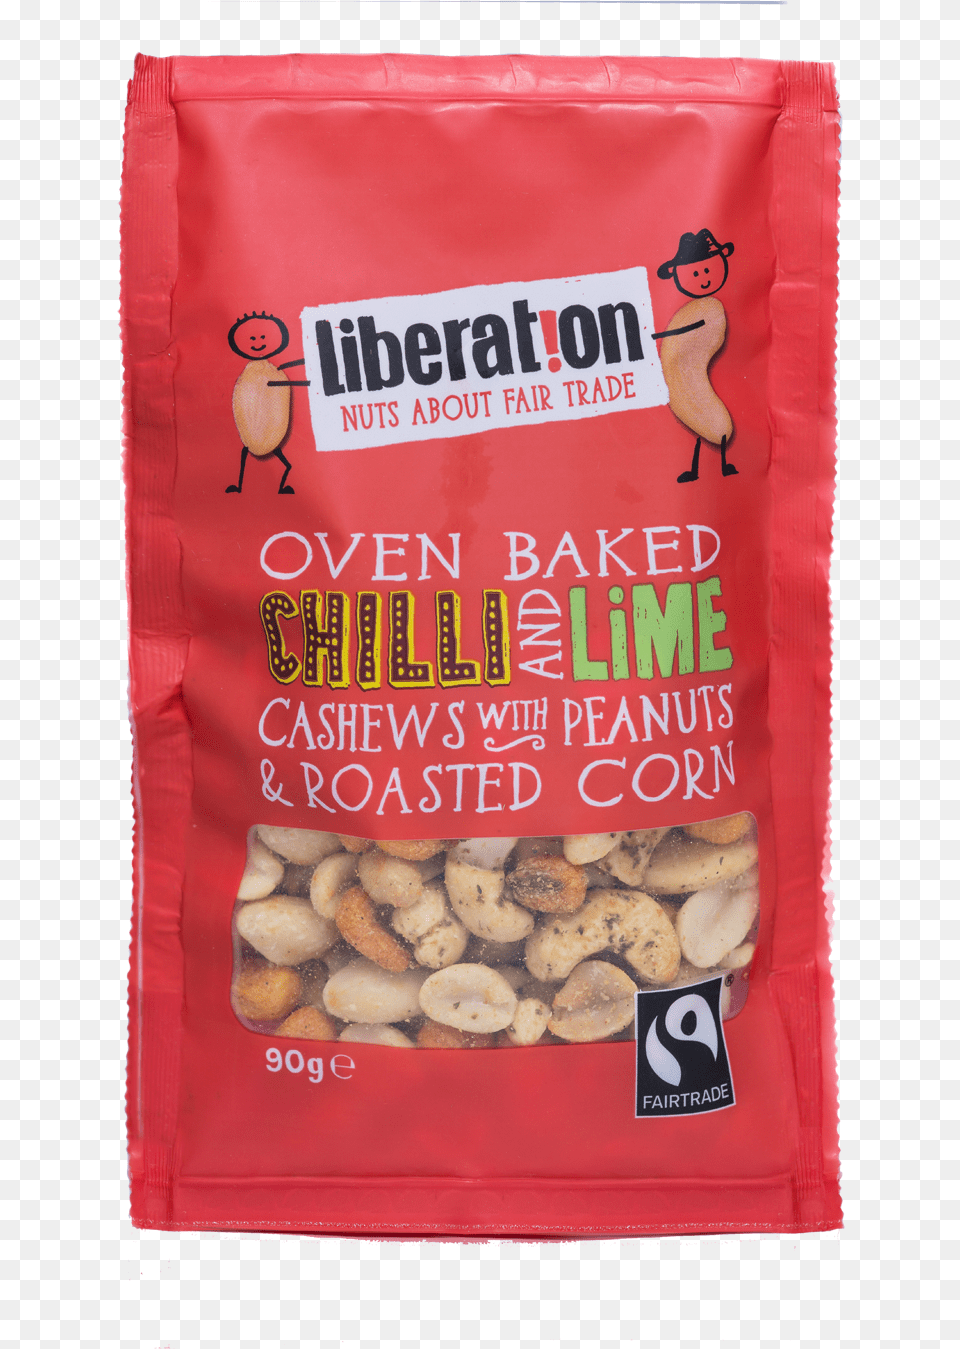 Liberation Oven Baked Chilli Amp Lime Cashews With Peanuts Cashew, Food, Nut, Plant, Produce Png